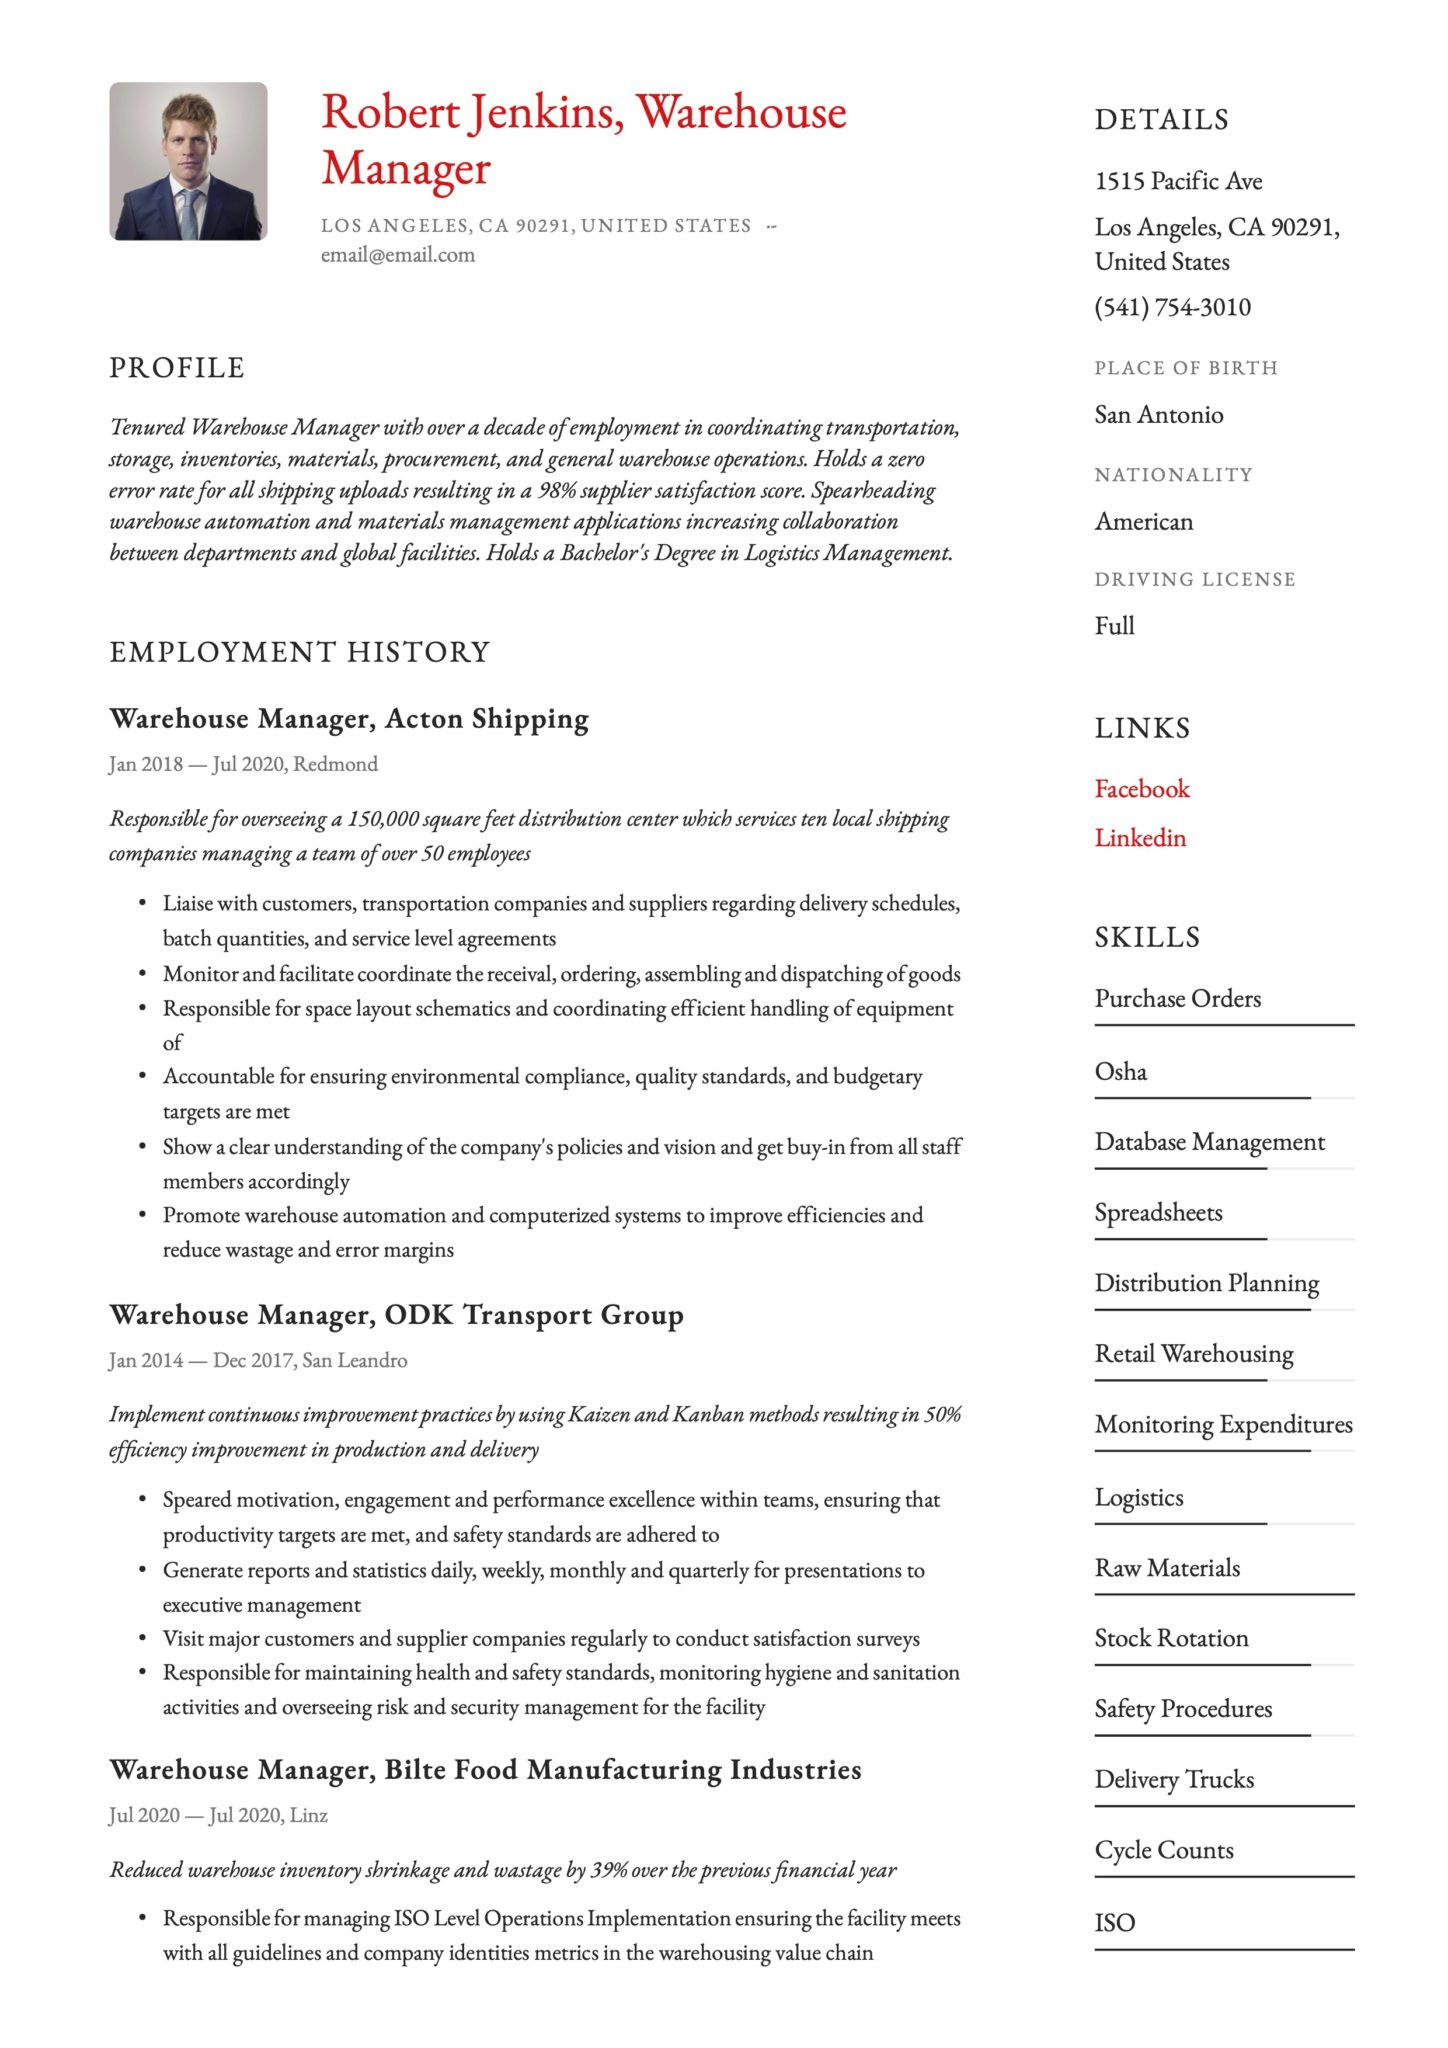 Sample Resume for top Management Position Warehouse Manager Resume & Writing Guide